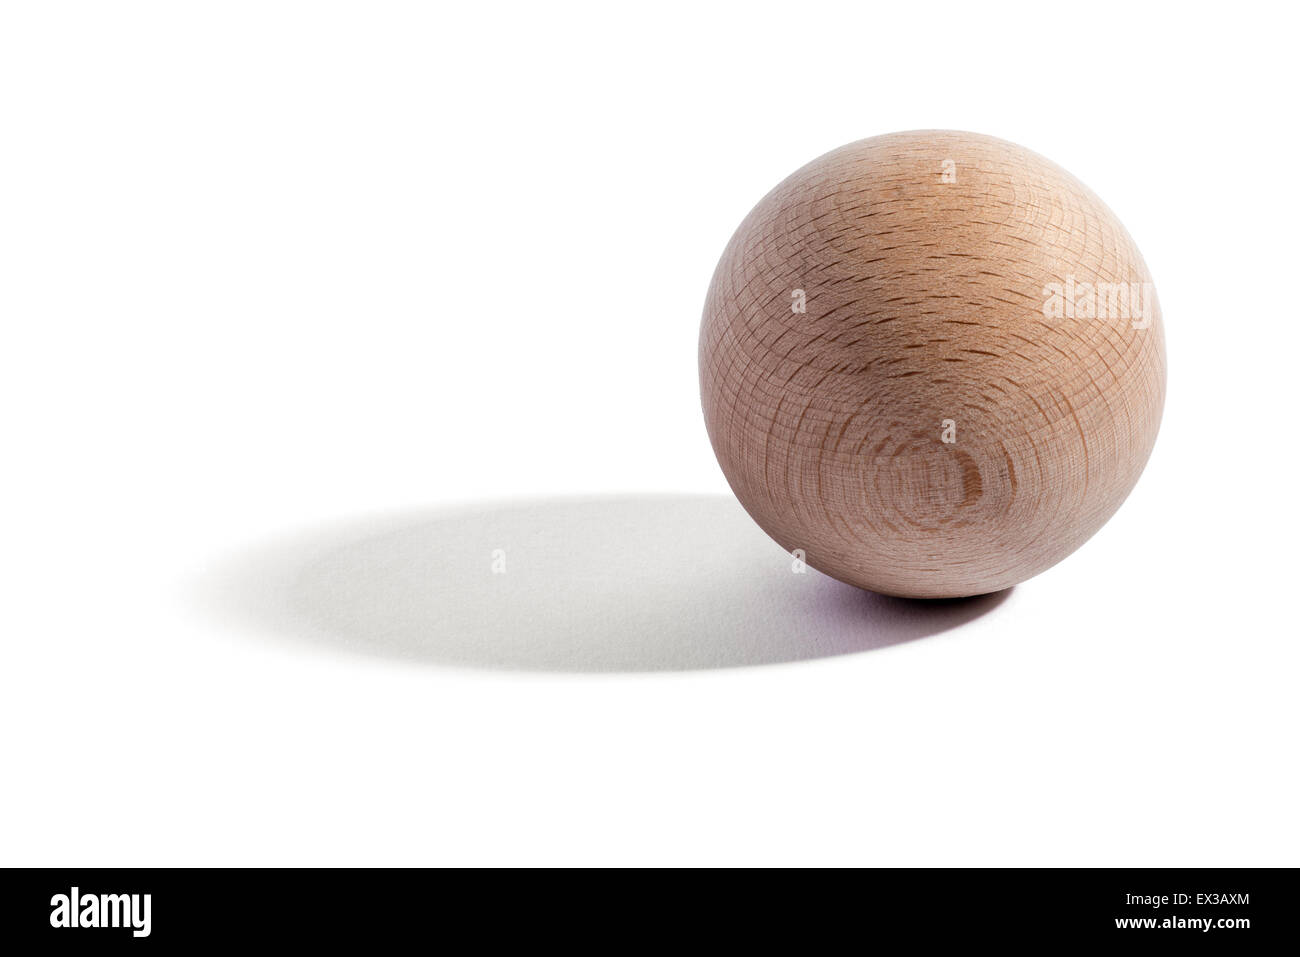 Plain natural wooden sphere or orb with wood grain over a white background with shadow and copy space Stock Photo